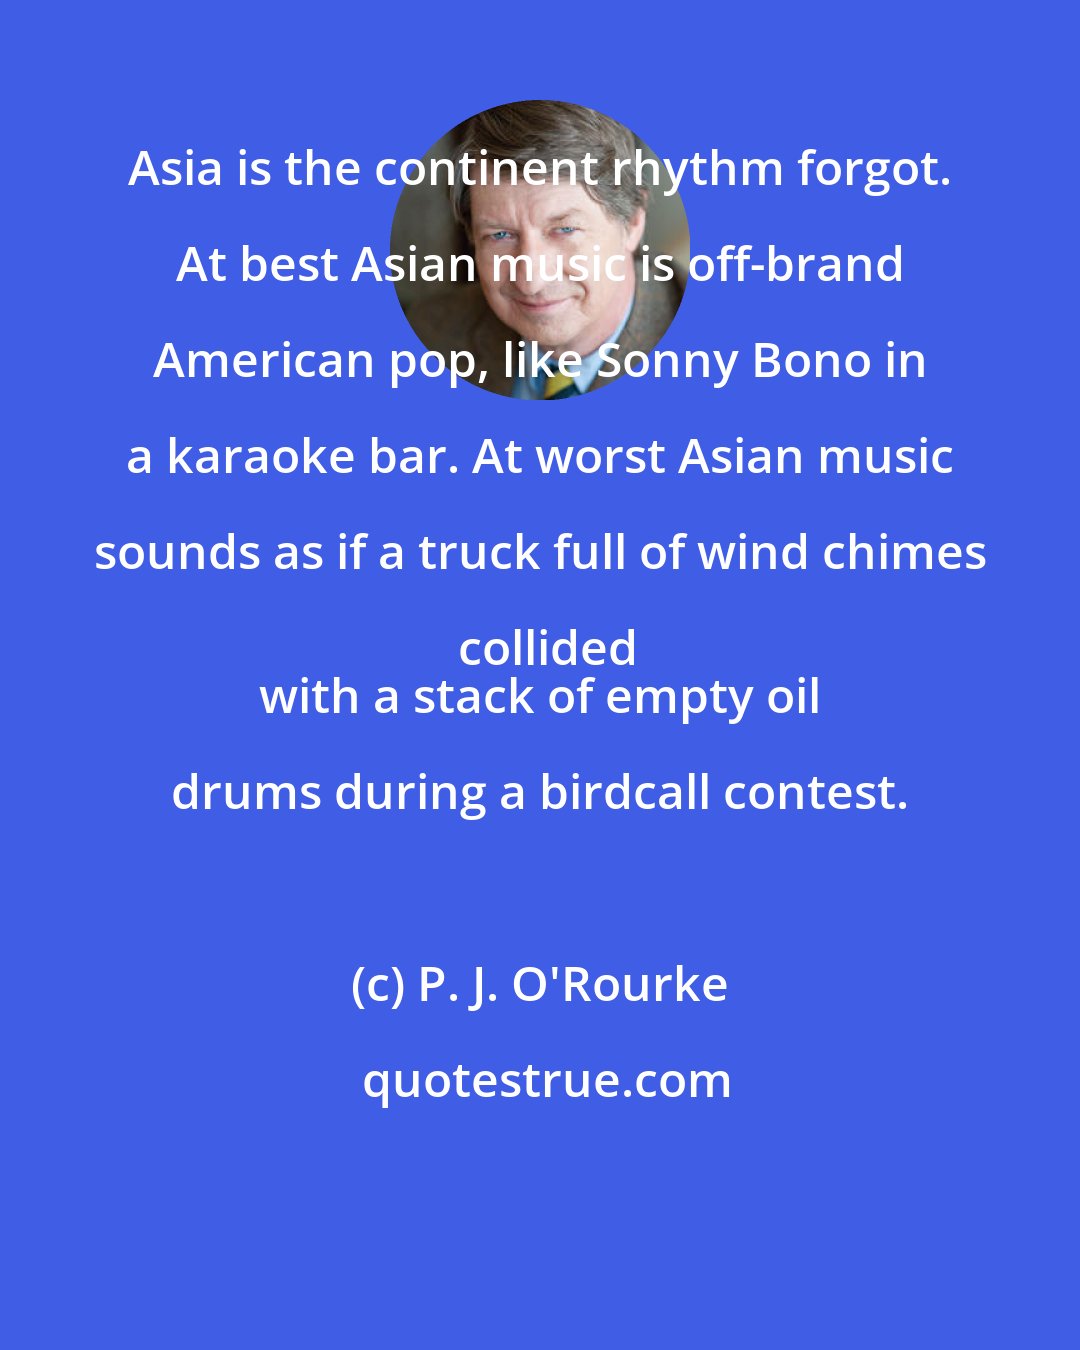 P. J. O'Rourke: Asia is the continent rhythm forgot. At best Asian music is off-brand American pop, like Sonny Bono in a karaoke bar. At worst Asian music sounds as if a truck full of wind chimes collided
 with a stack of empty oil drums during a birdcall contest.